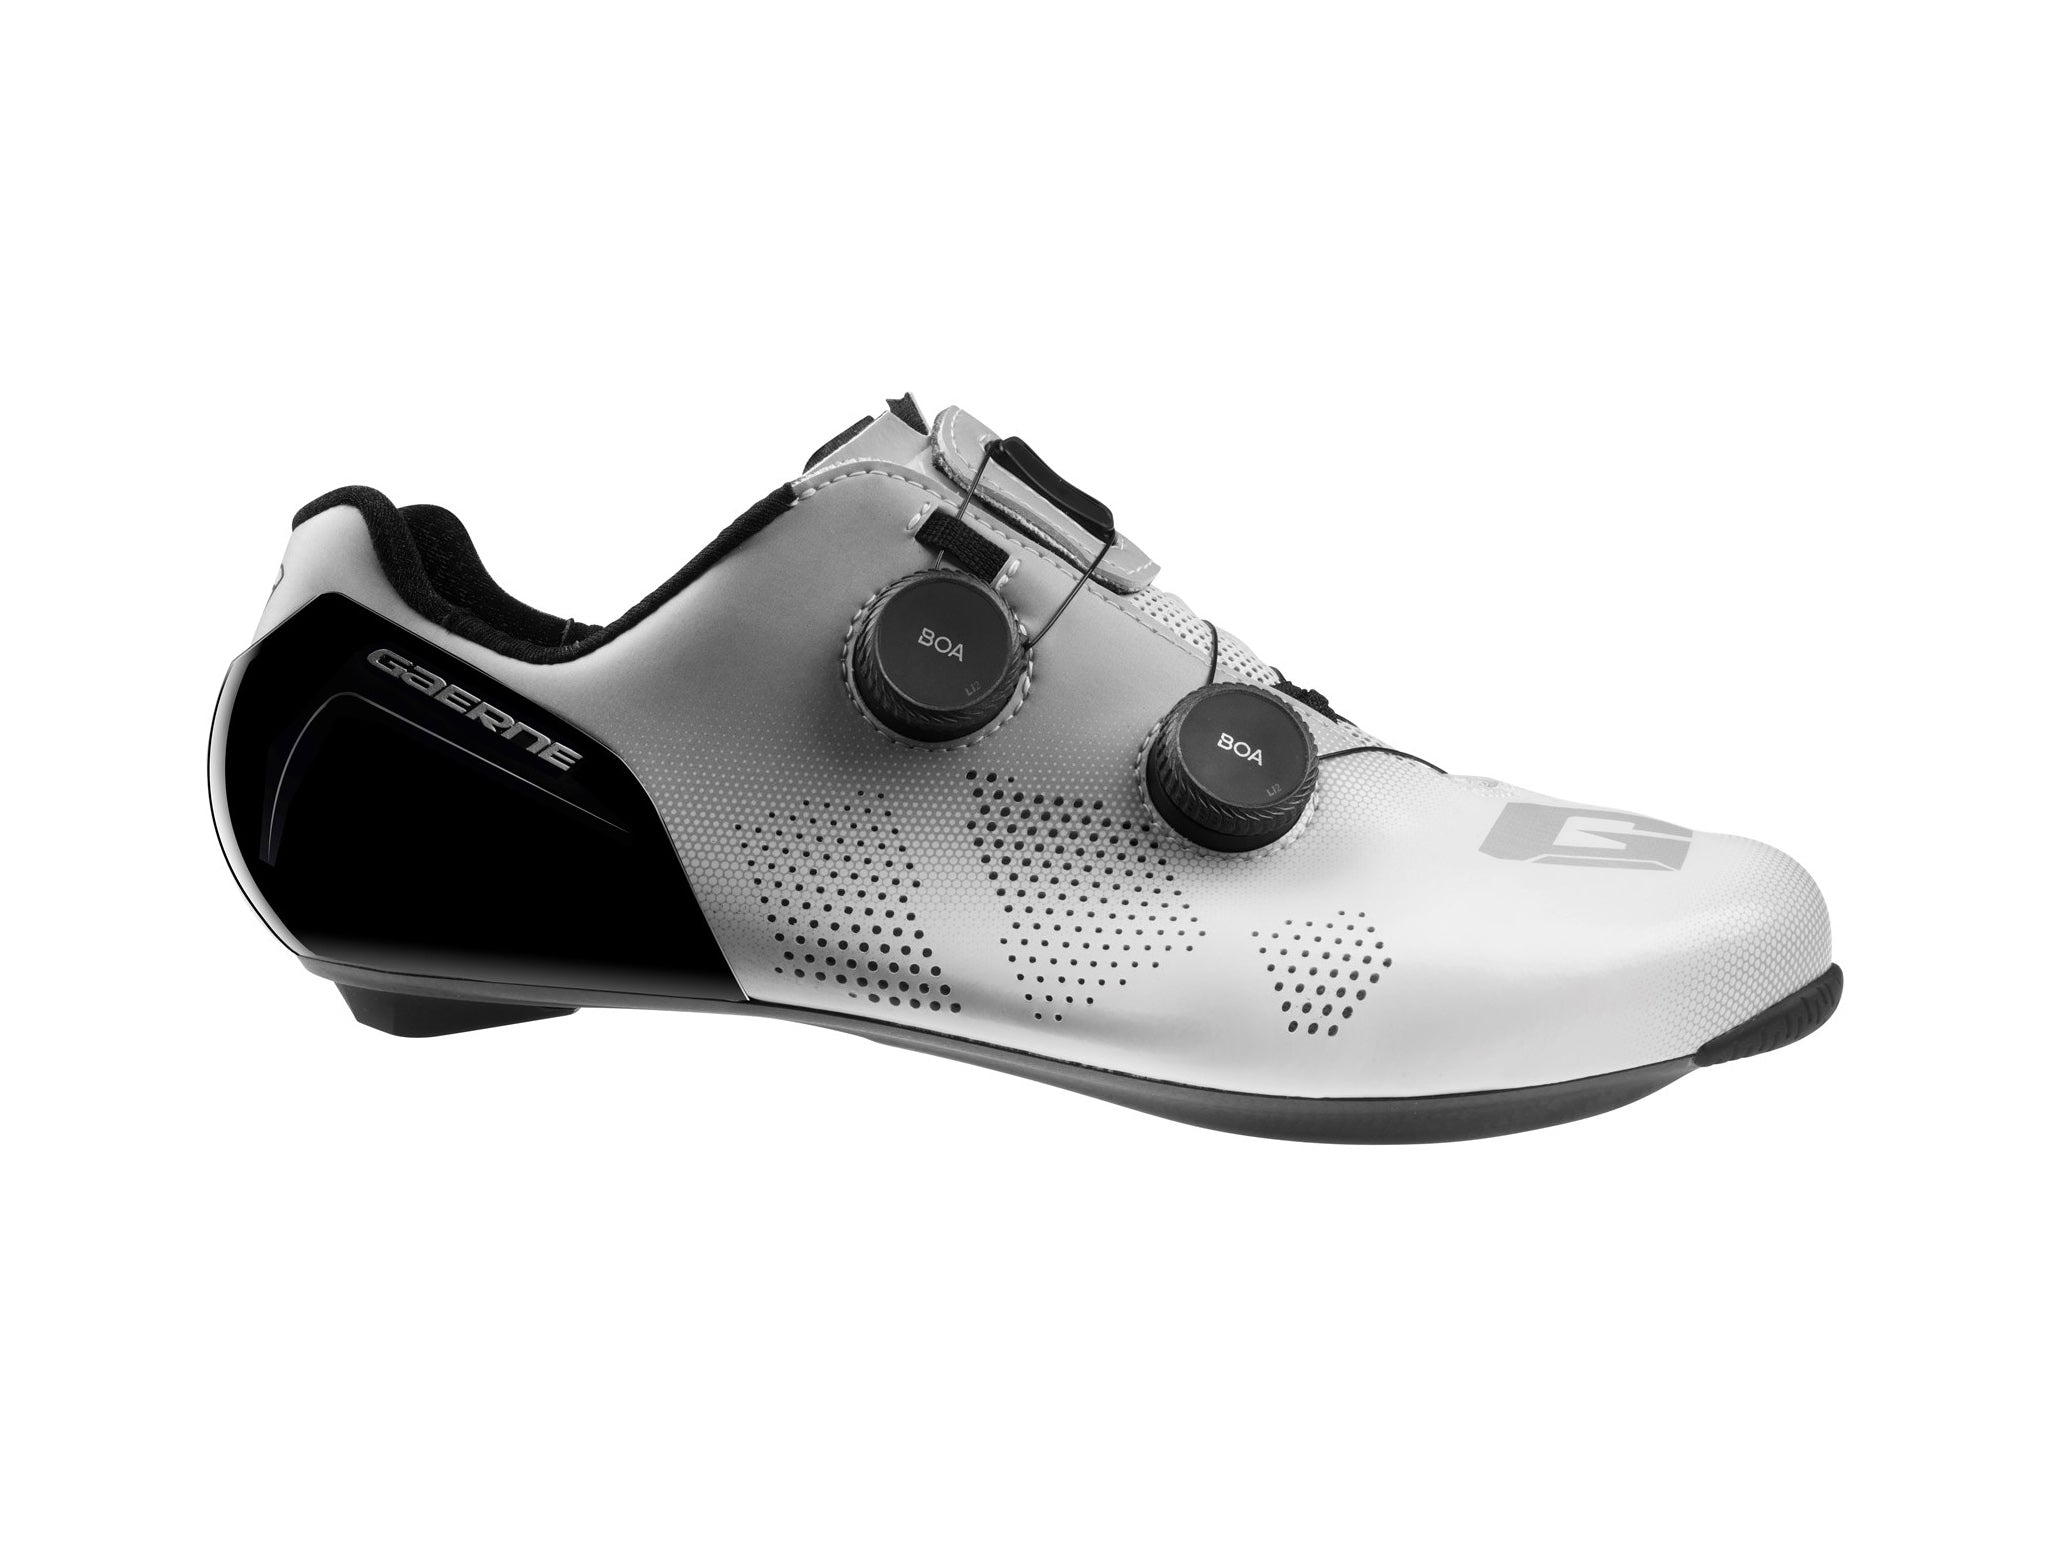 Gaerne Cycling Shoes USA Online Store – GAERNE CYCLING USA